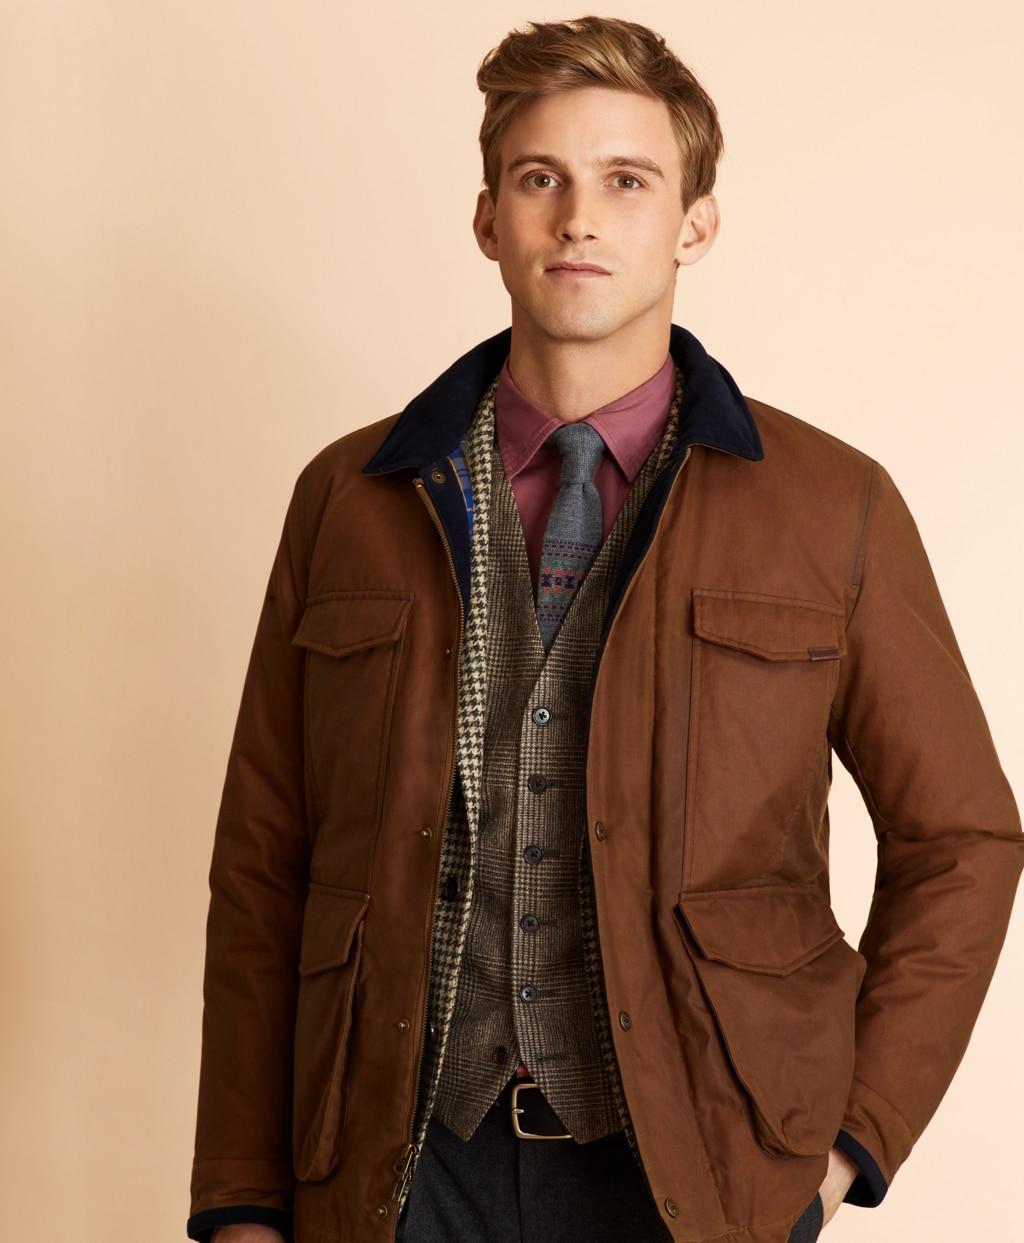 Brooks Brothers Four-pocket Waxed Canvas Jacket in Brown for Men - Lyst